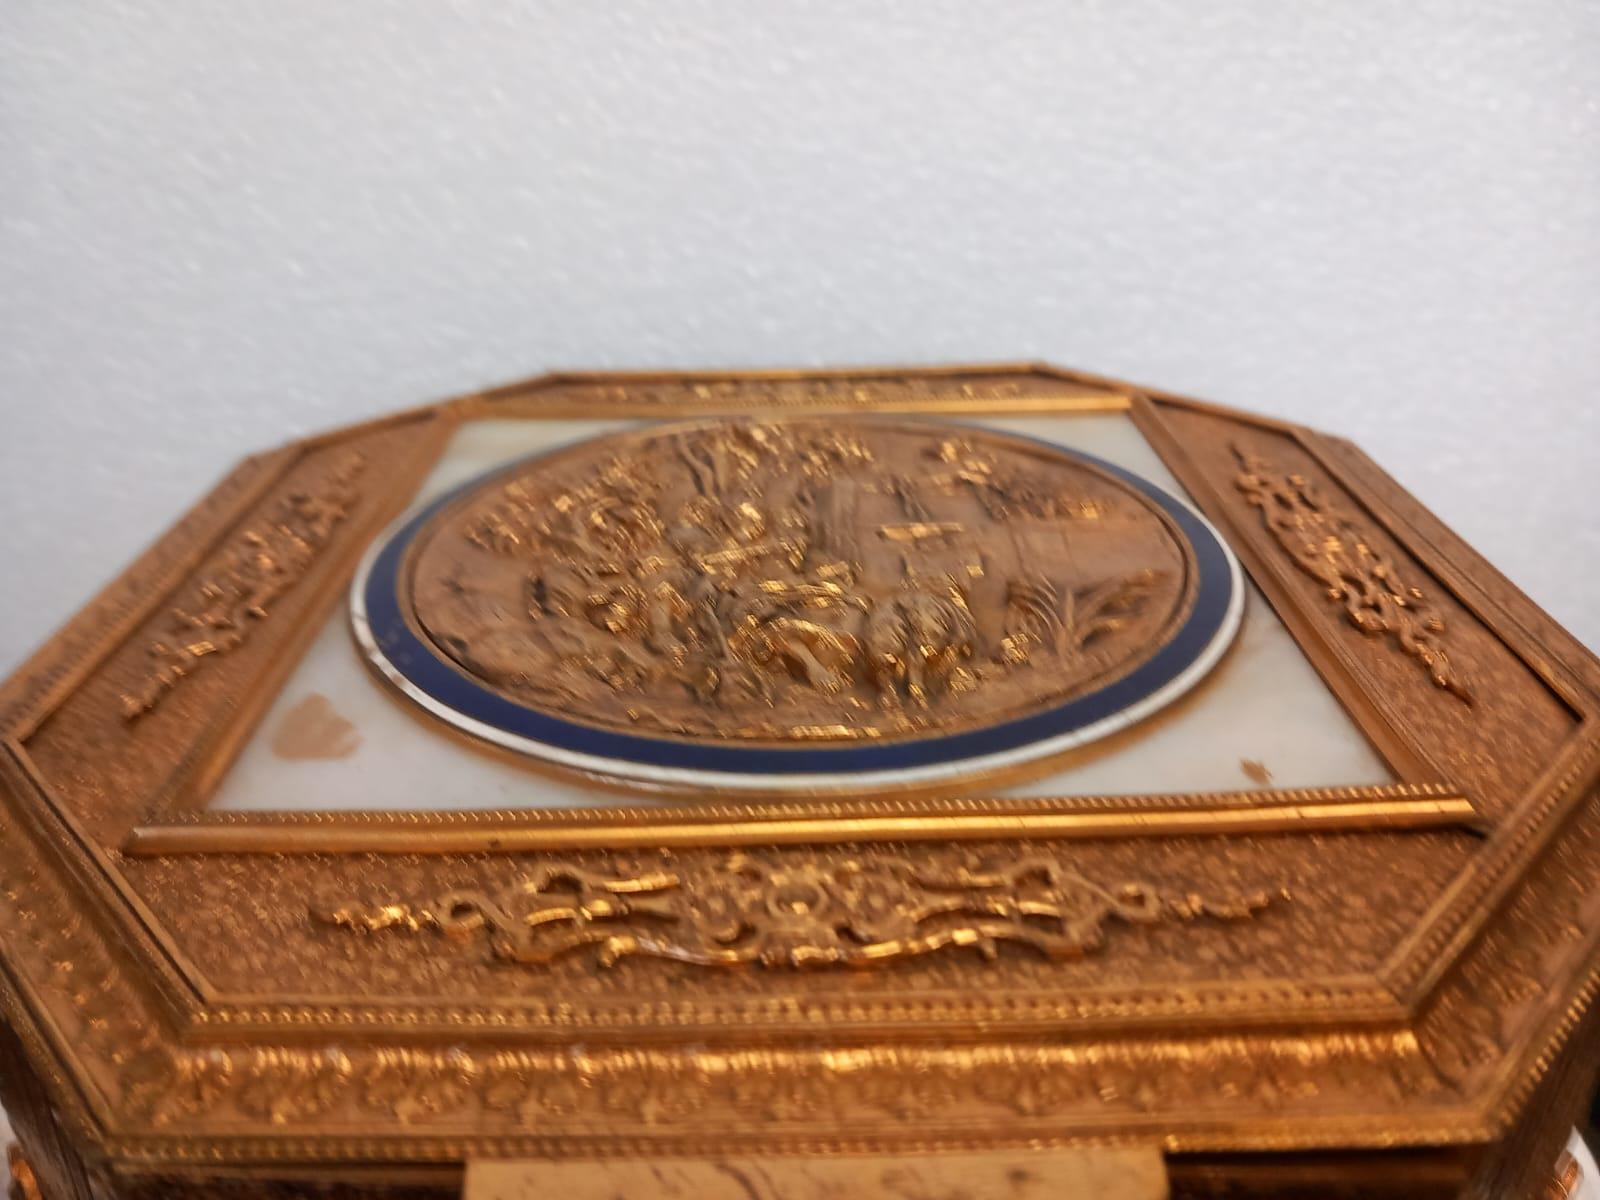 Palais Royal gilt bronze and mother of pearl jewellery casket or trinket box In Excellent Condition For Sale In London, GB